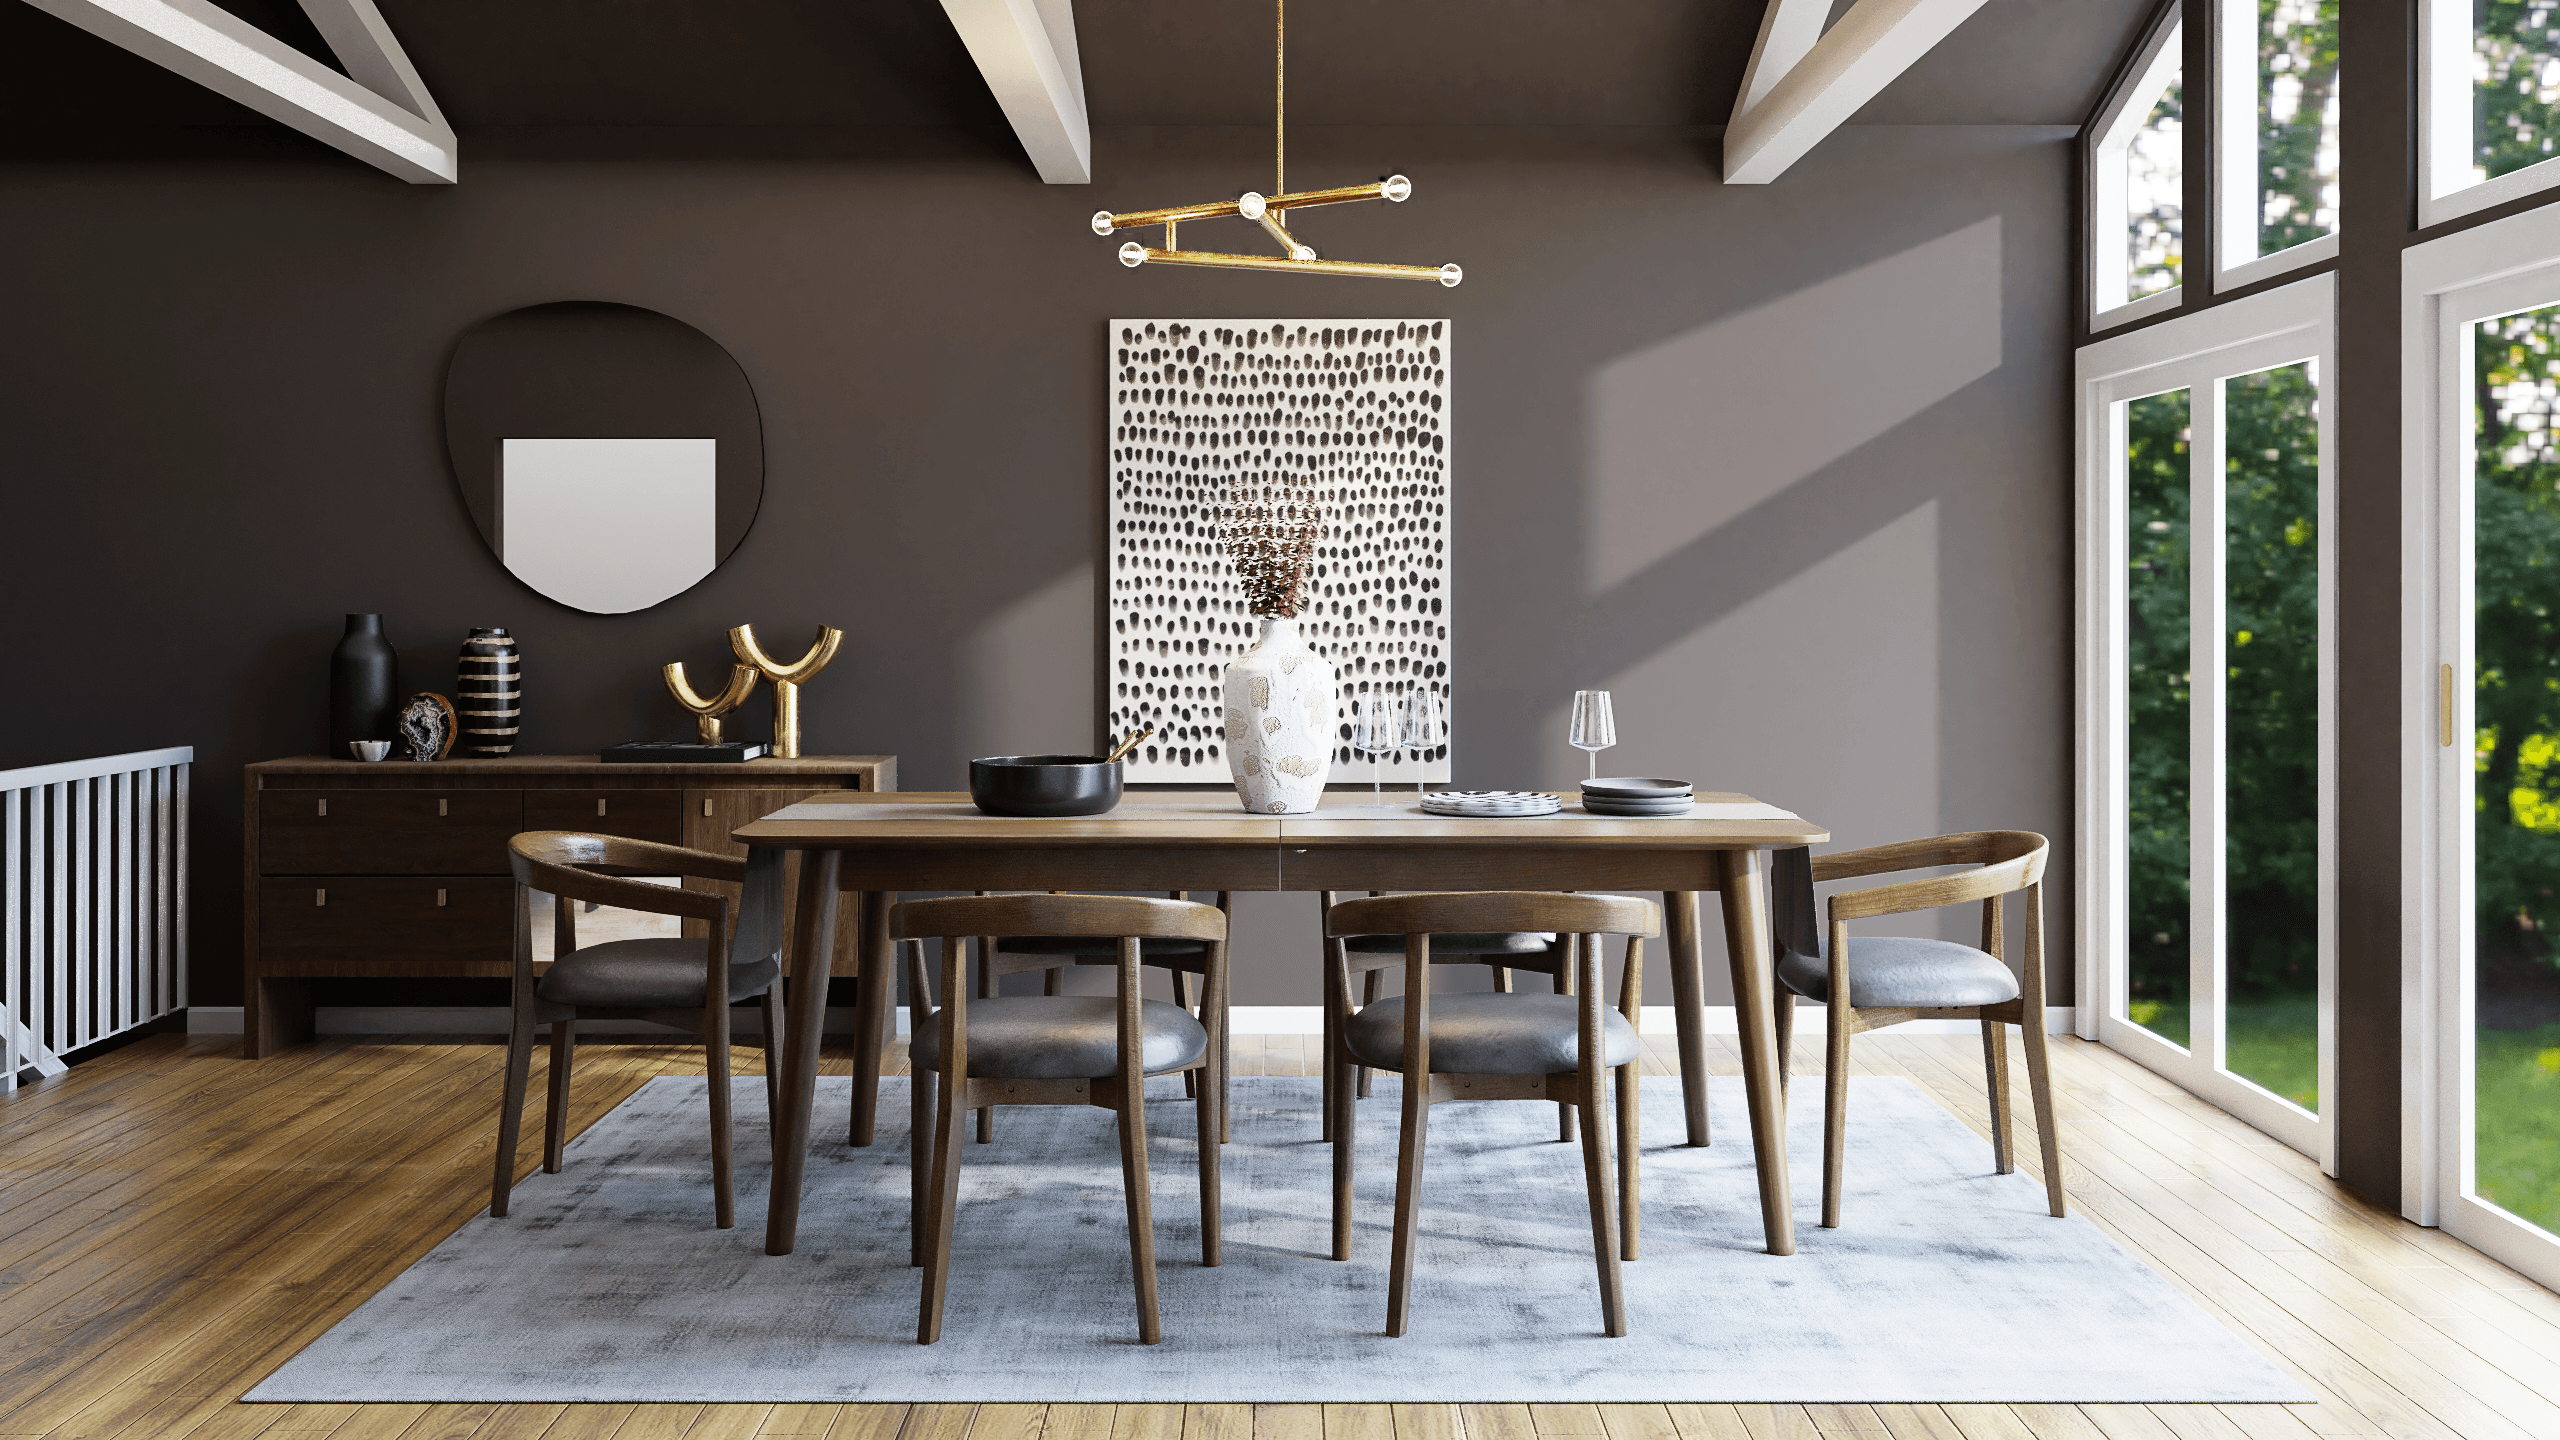 Ash Gray Walls Add Glam To This Mid-Century Dining Room 